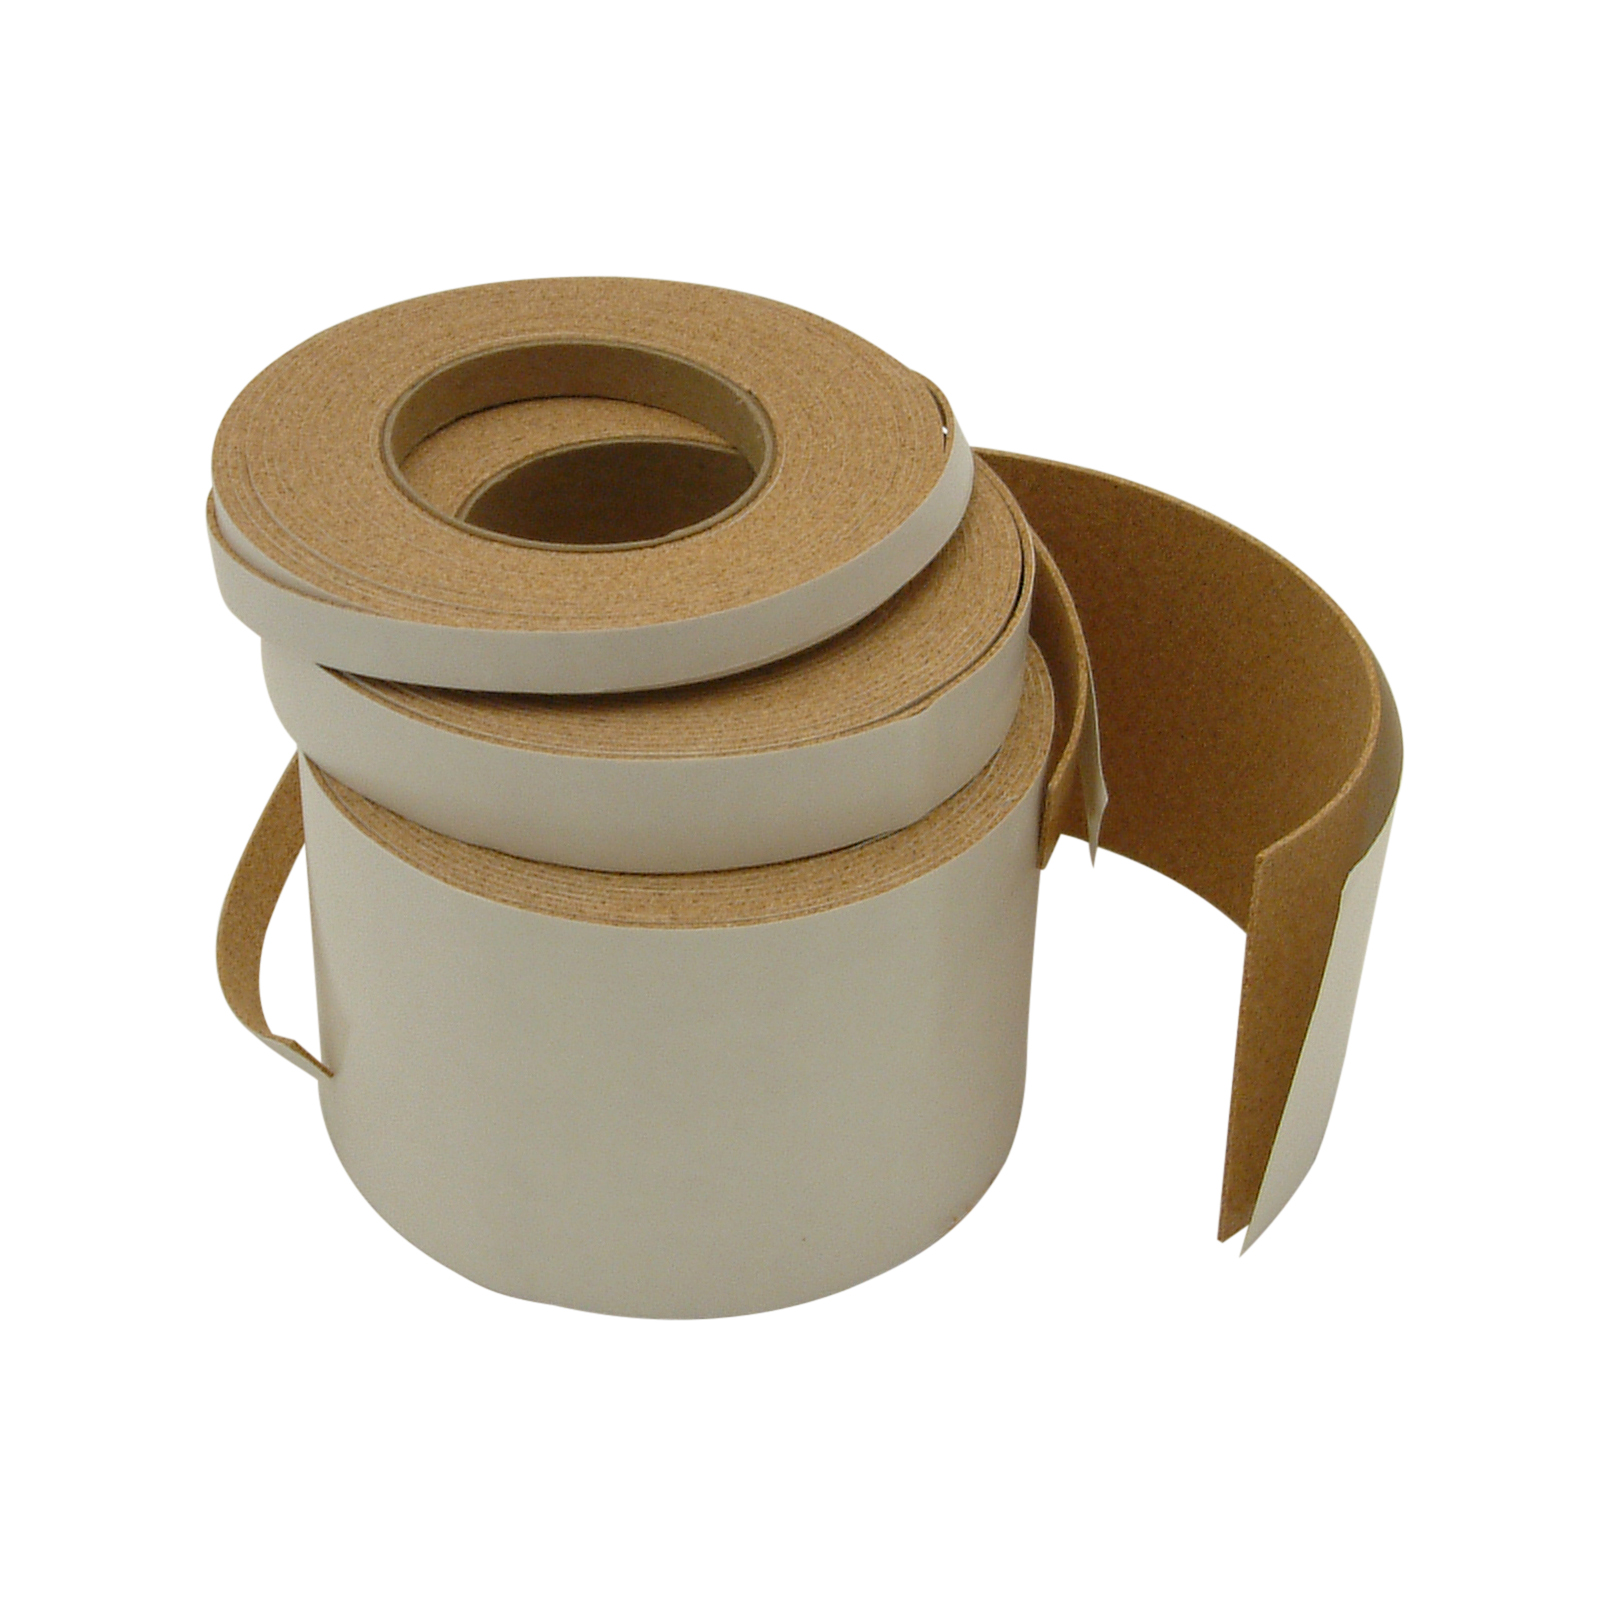 JVCC CORK-1 Adhesive-Backed Cork Tape [1/16&quot; thick cork]